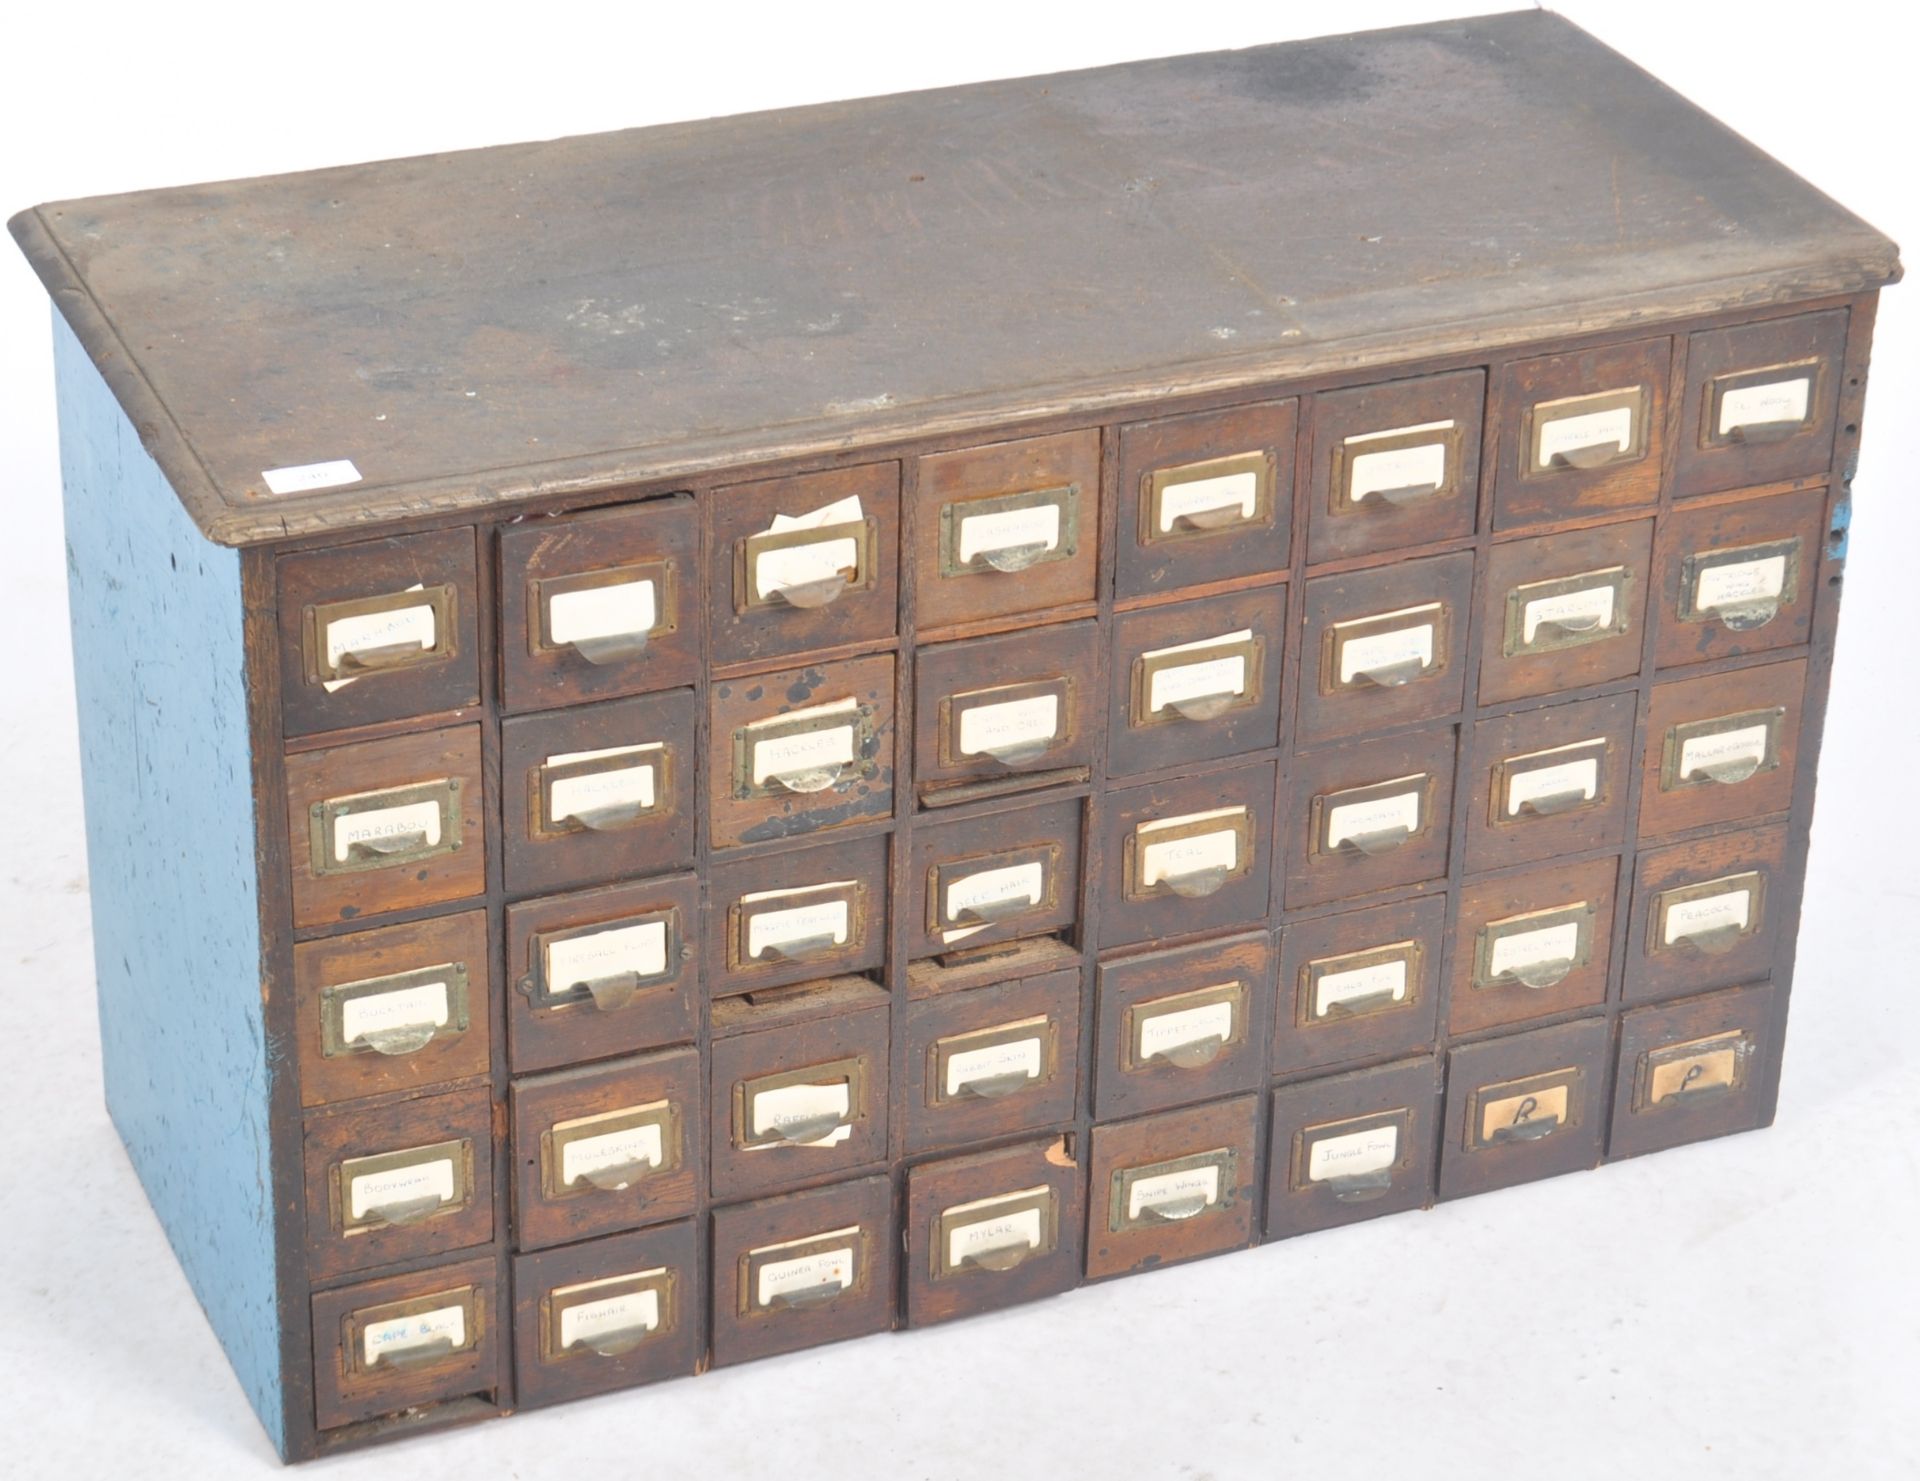 EARLY 20TH CENTURY MULTI DRAWER PIGEON HOLE CABINET - Image 2 of 6